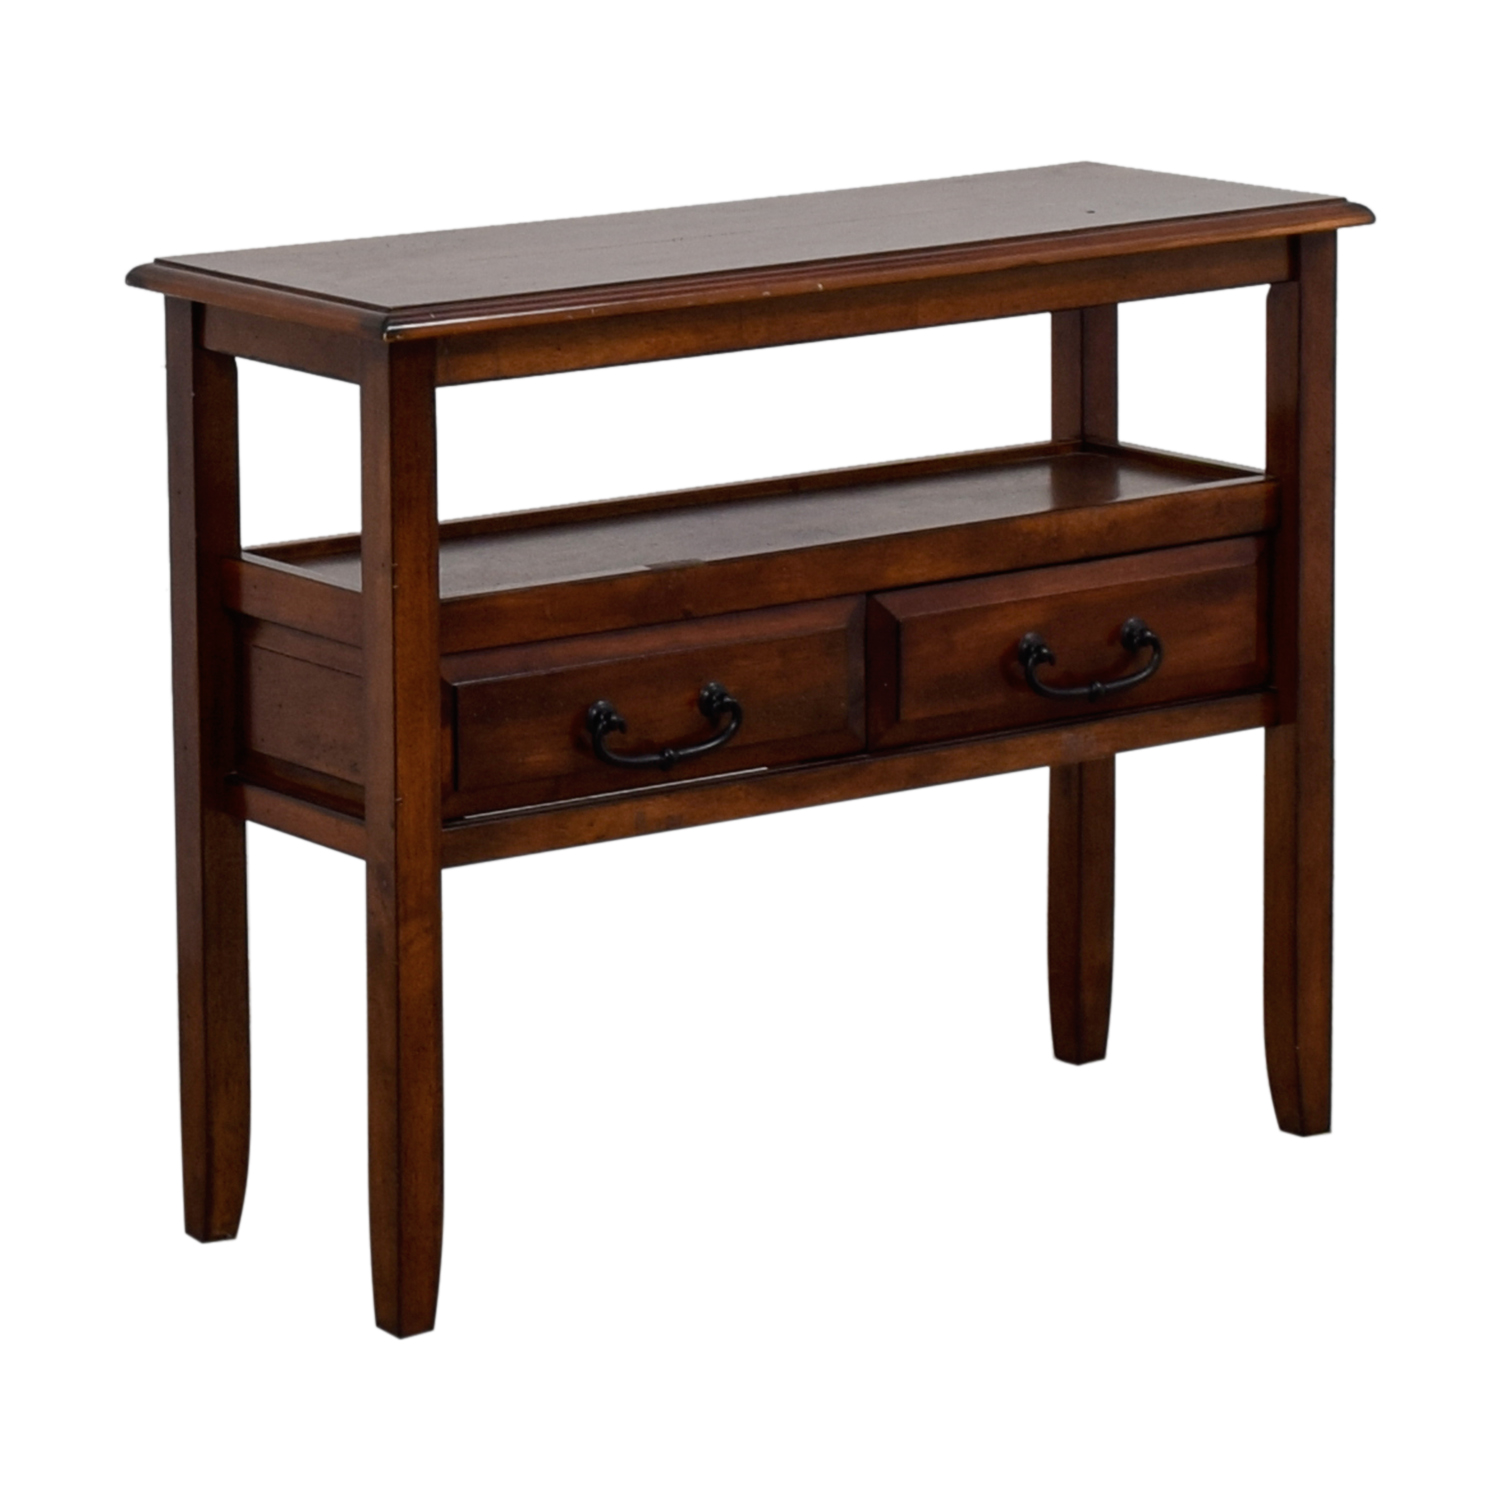 off pier imports wood two drawer side sofa entry way table second hand small accent tables one decoration pieces for drawing room west elm buffet bamboo nesting vienna furniture